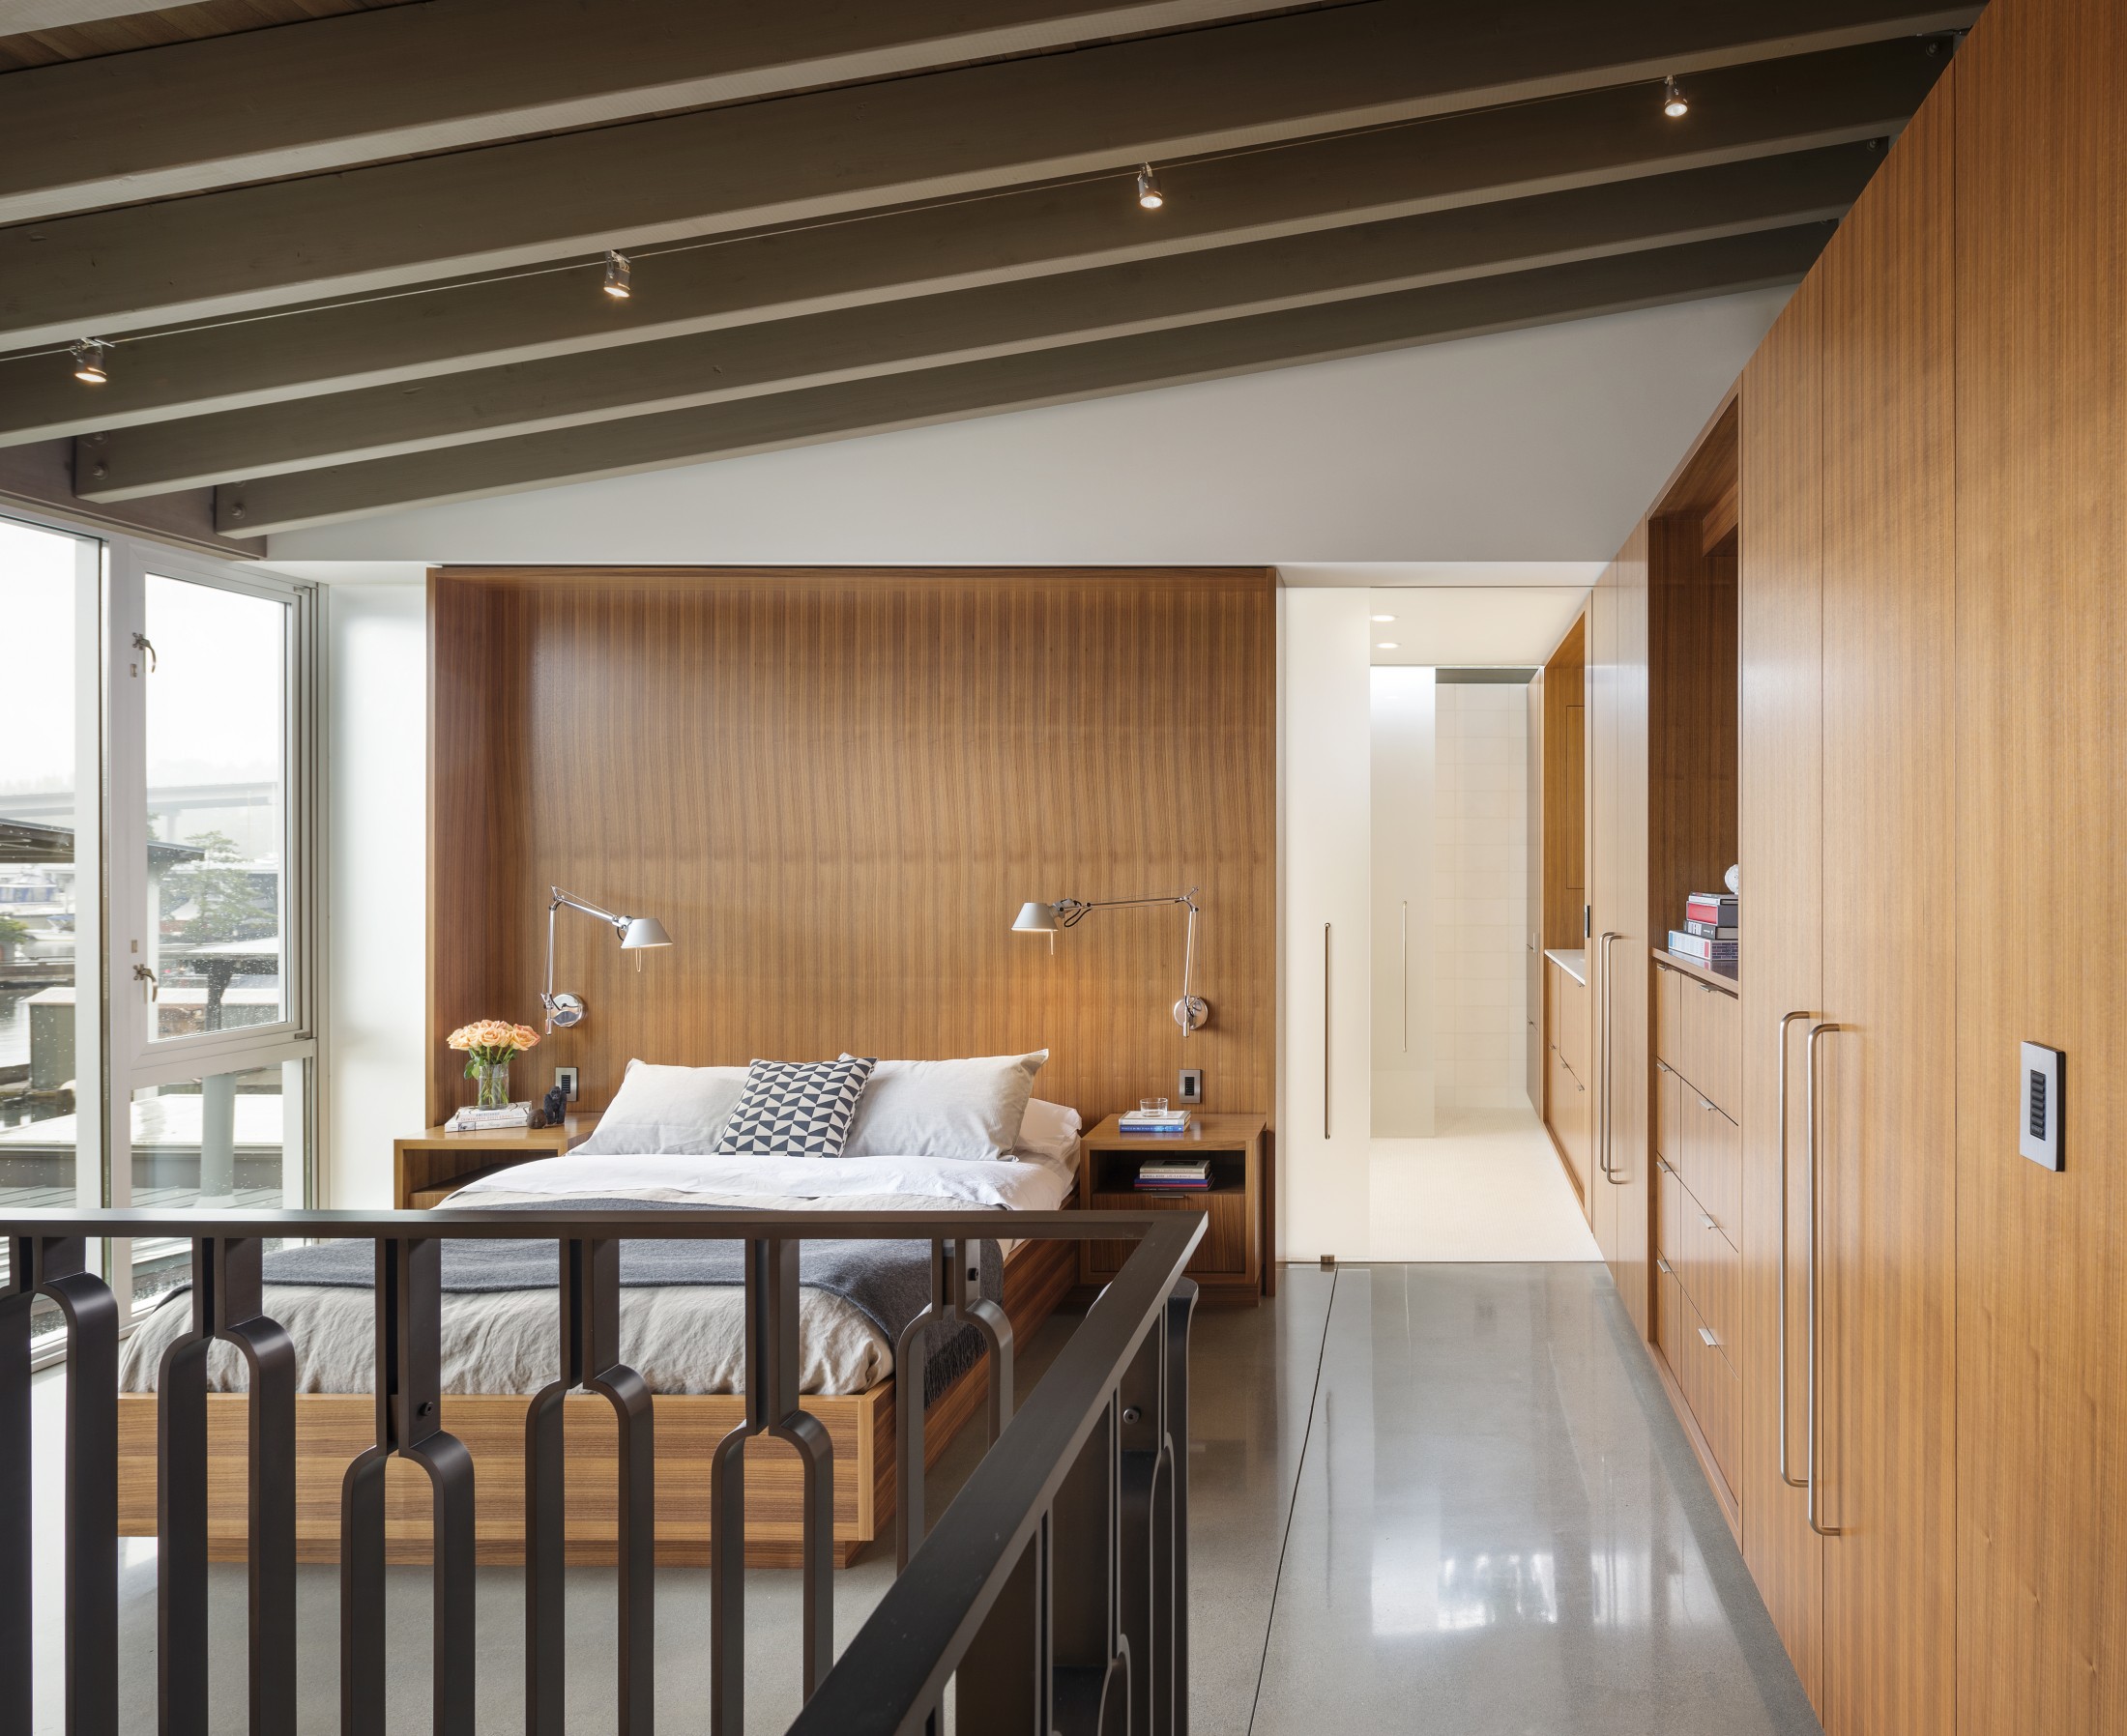 The master bedroom is clad with warm colored wood and there's a glazed wall to catch the views